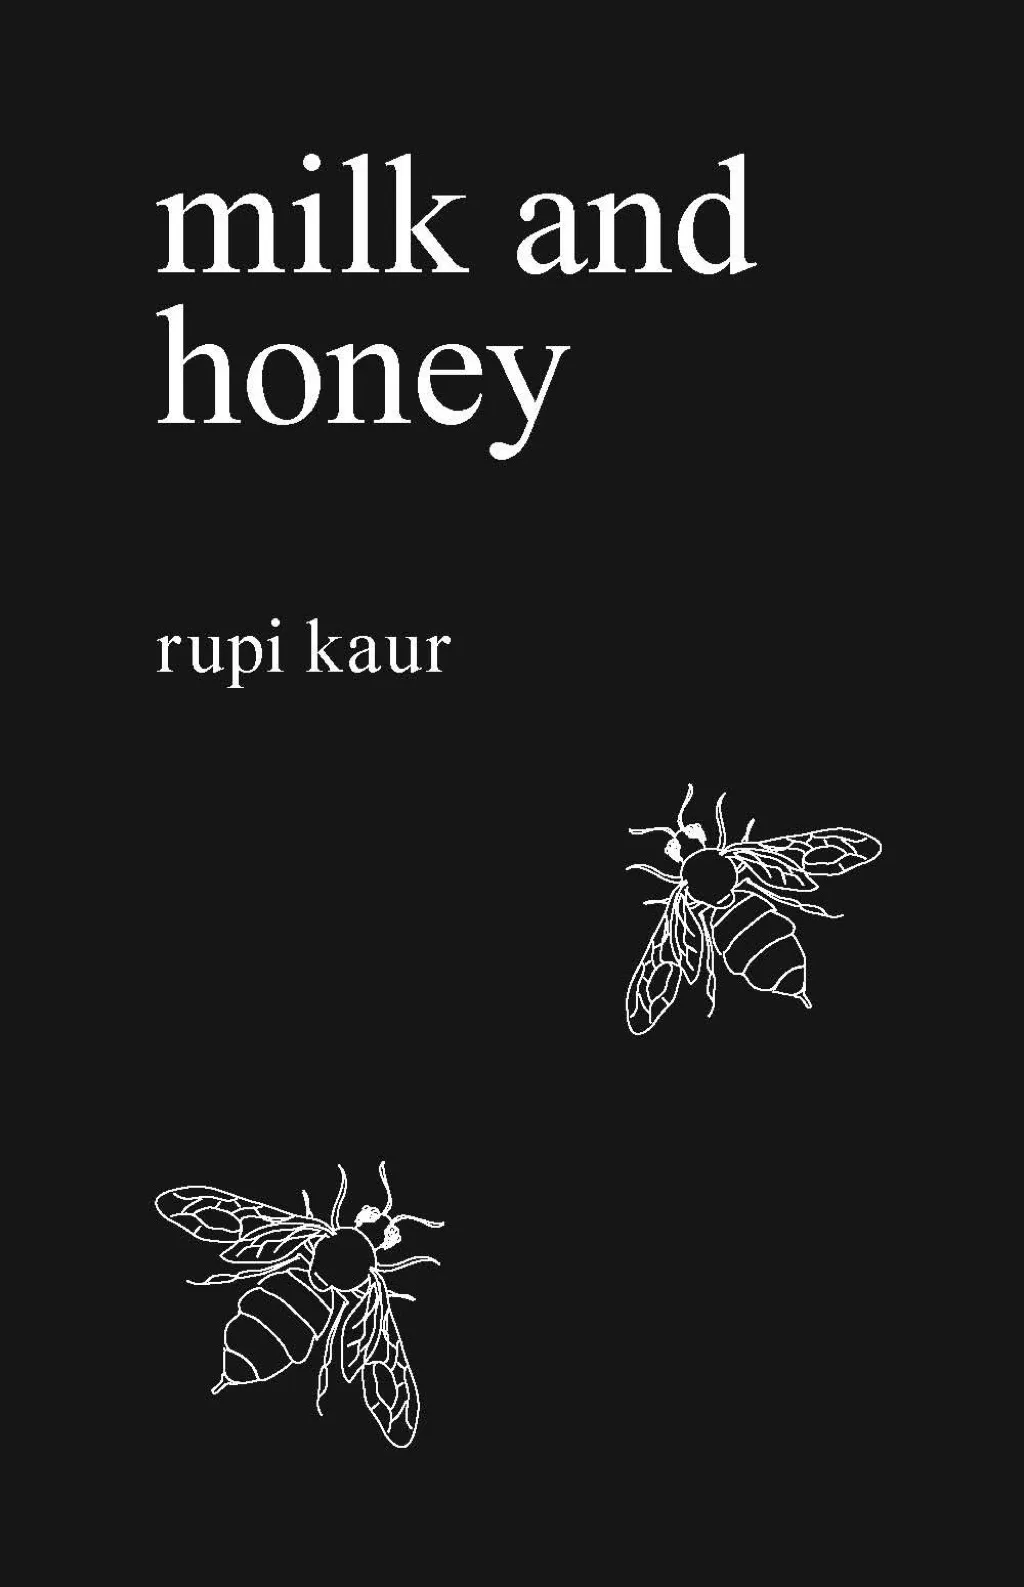 Milk and Honey by Rupi Kaur books every woman should read in her 40s